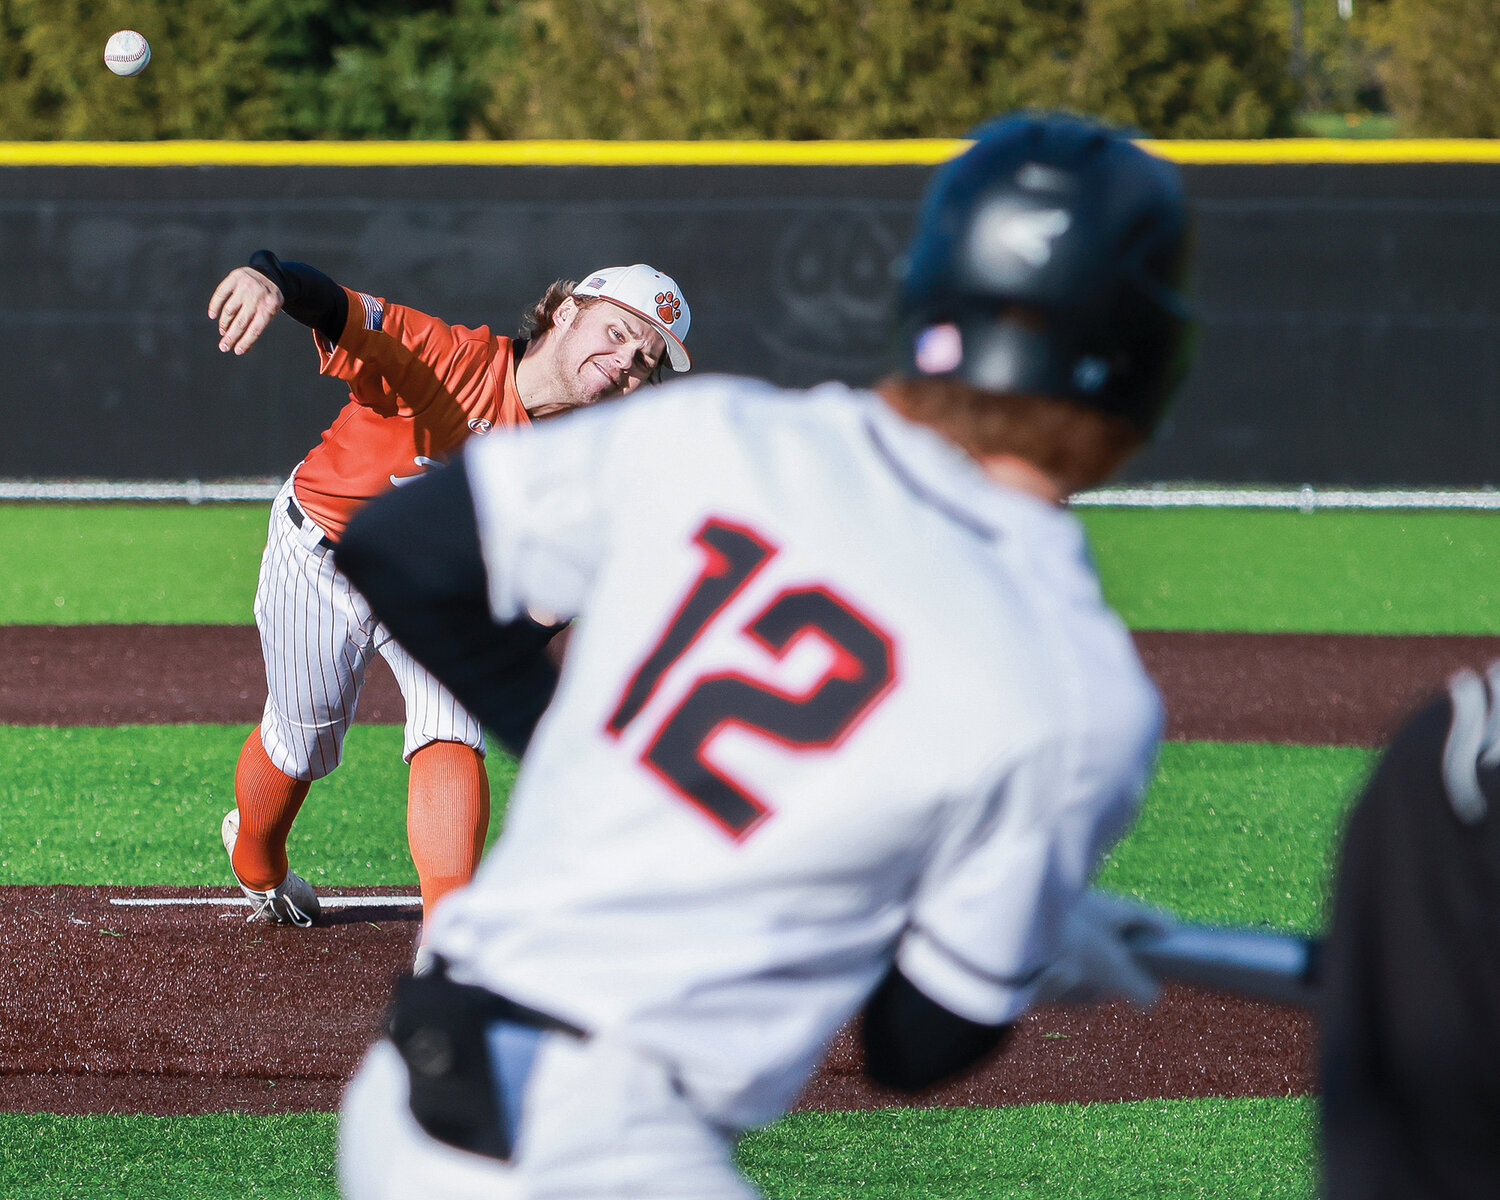 Battle Ground's Ty Linster throws a pitch resulting in a strike during the team's game one loss against Camas on Tuesday, April 11.